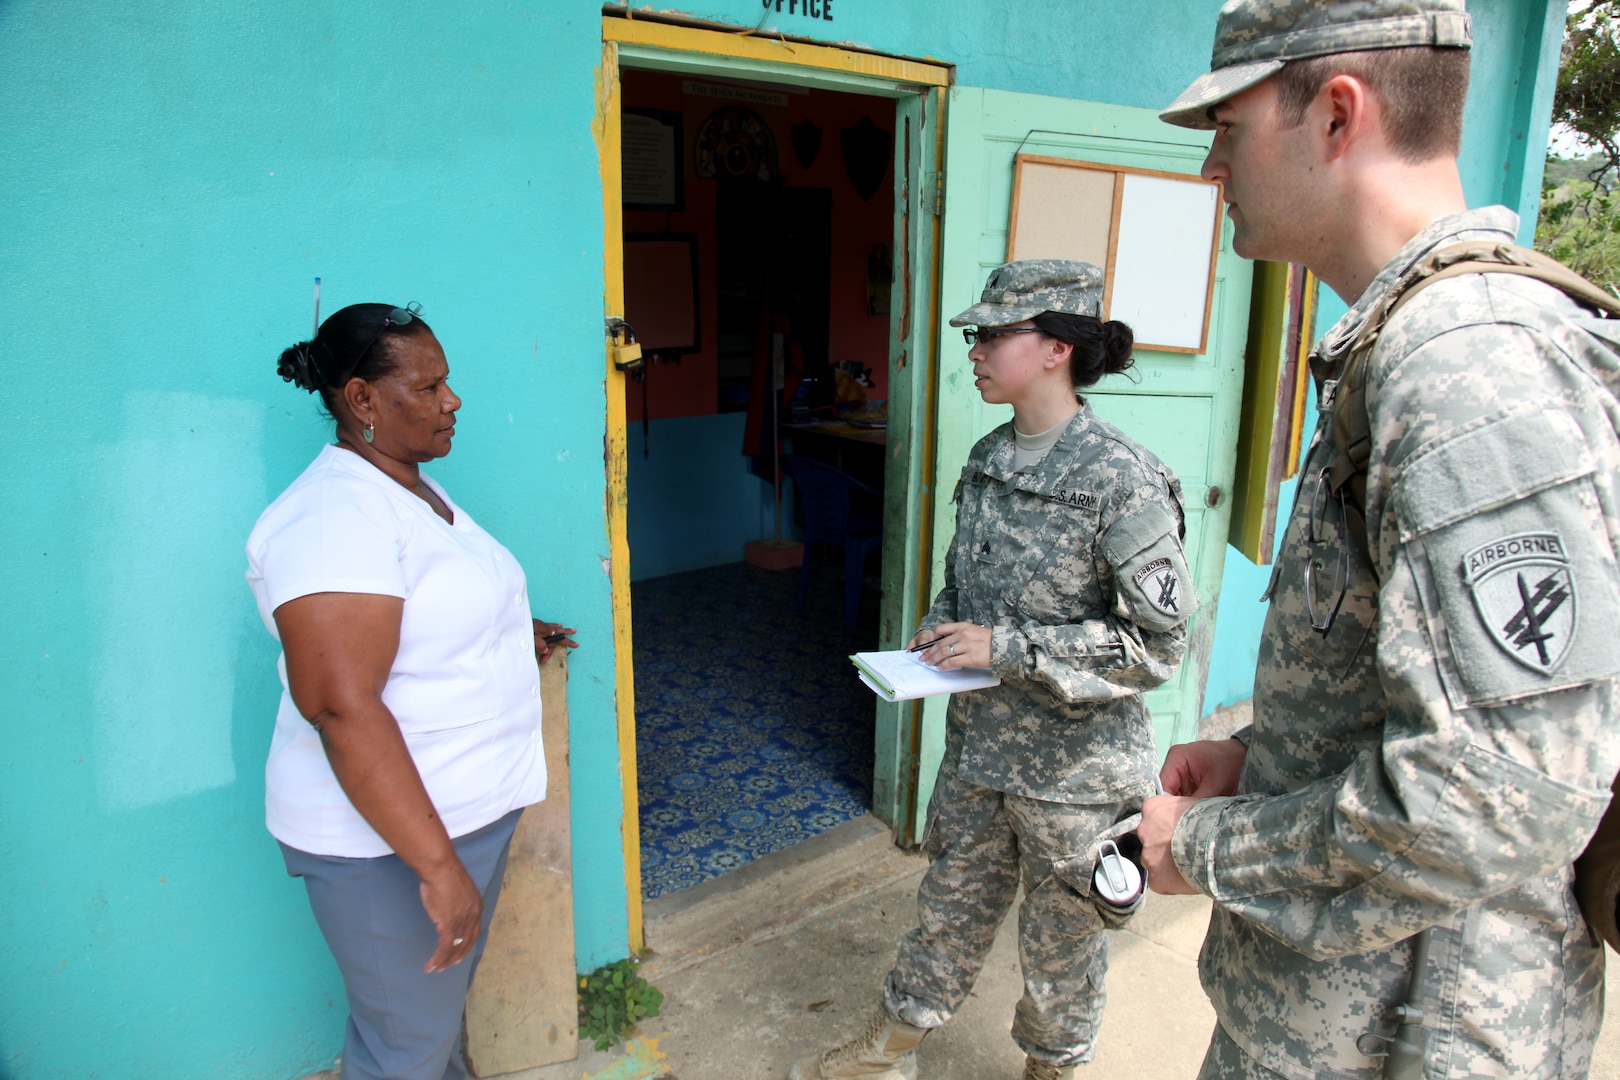 Soldiers with 399th Tactical Psychological Operations Company ask permission of local school headmaster to post information outside school in Cristo Rey, Belize, April 24, 2017 (U.S. Army/Joshua E. Powell)